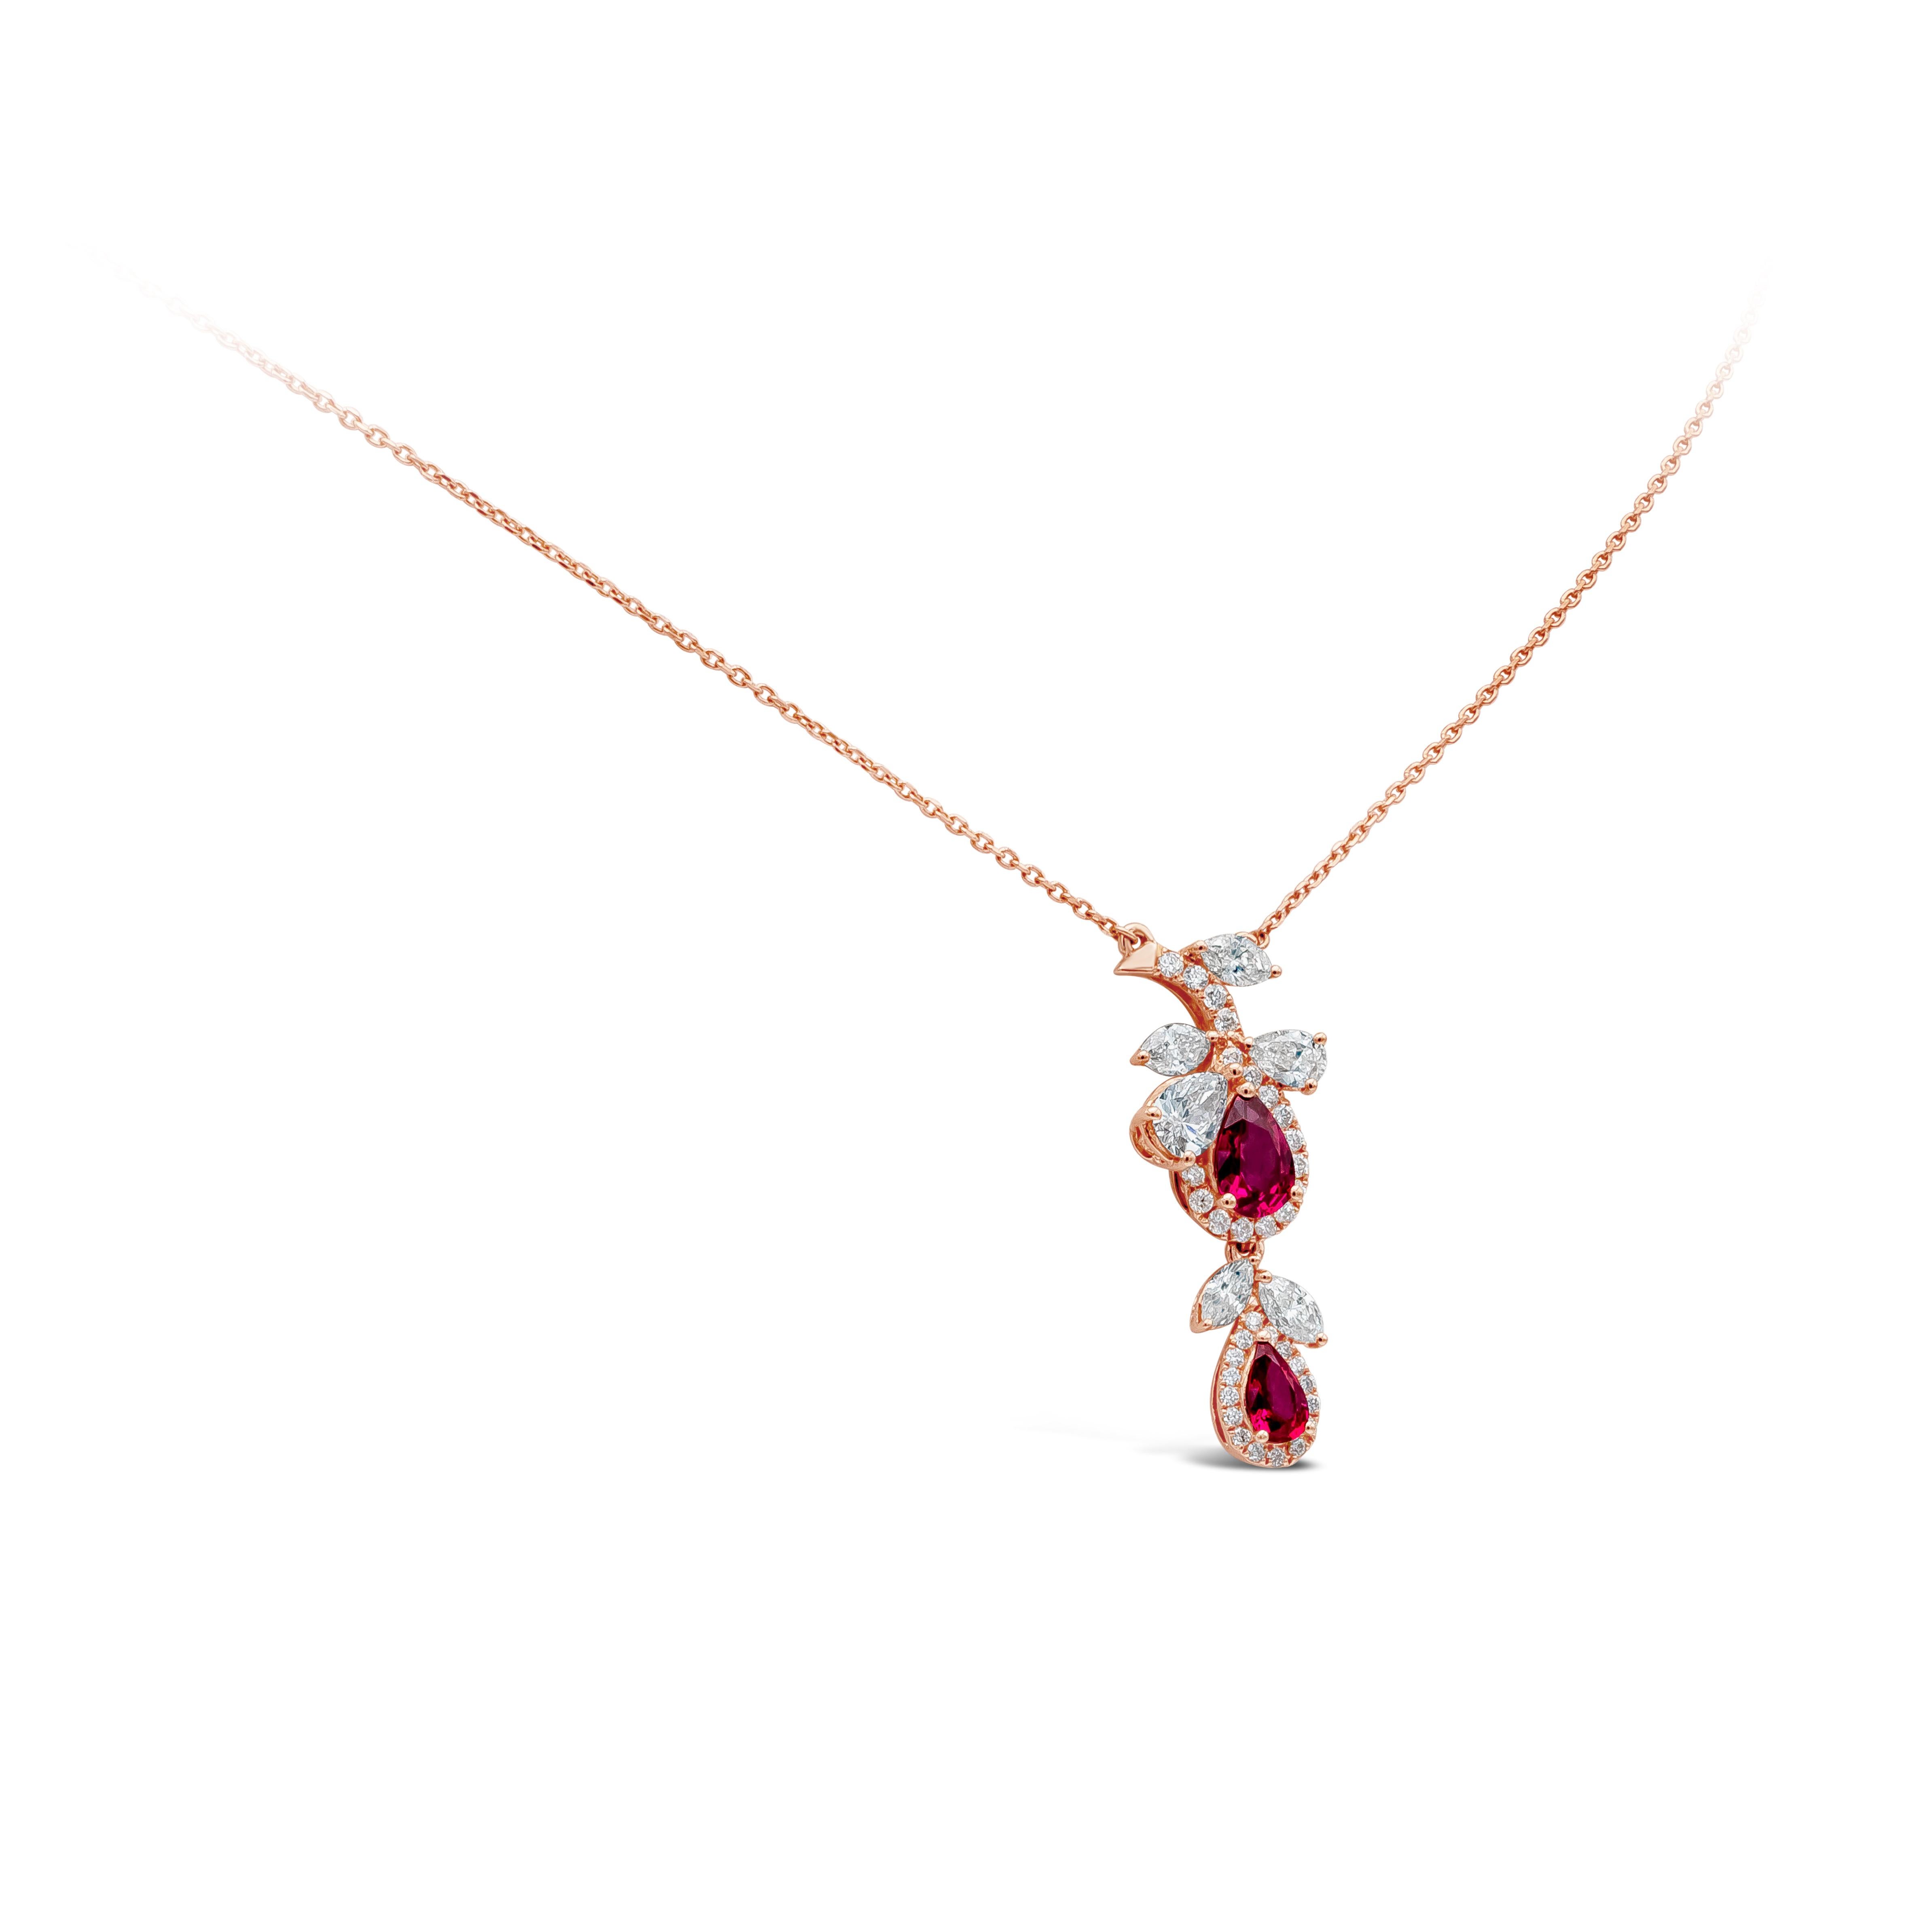 Floral motif pendant necklace featuring a vibrant pear shape ruby approximately weighing at 0.62 carats, accented by mixed shape diamonds that weigh about 0.78 carat, FGG color and VS in clarity.
Suspended on an 18 inch rose gold chain.

Roman